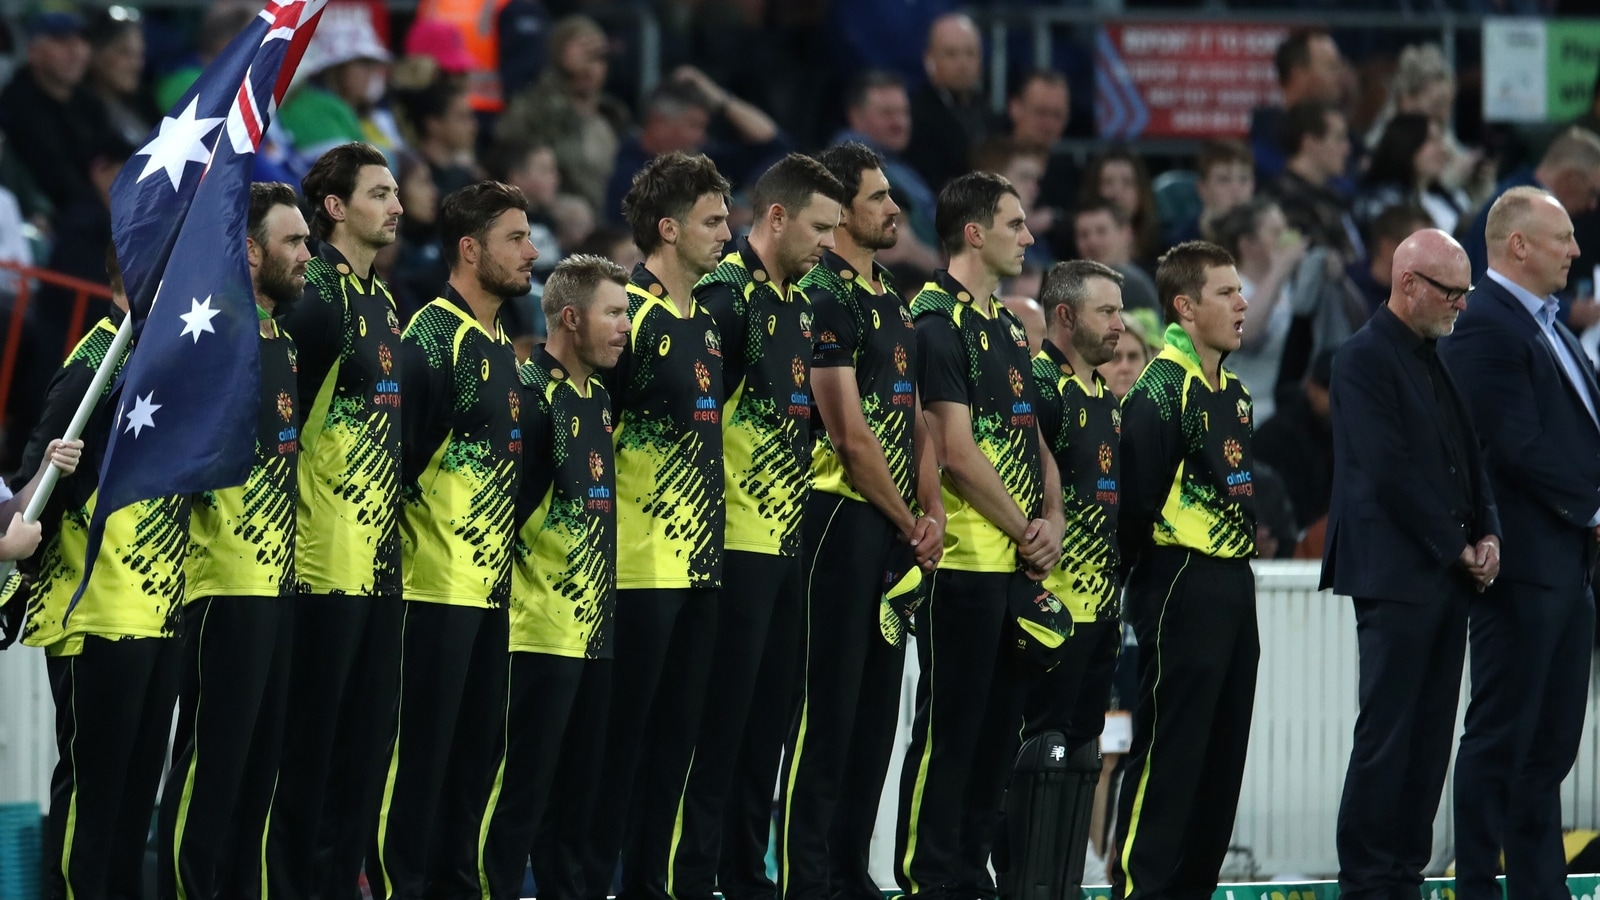 australia-star-explains-reason-behind-aaron-finch-led-team-s-dropped-intensity-ahead-of-t20-world-cup-opener-vs-nz